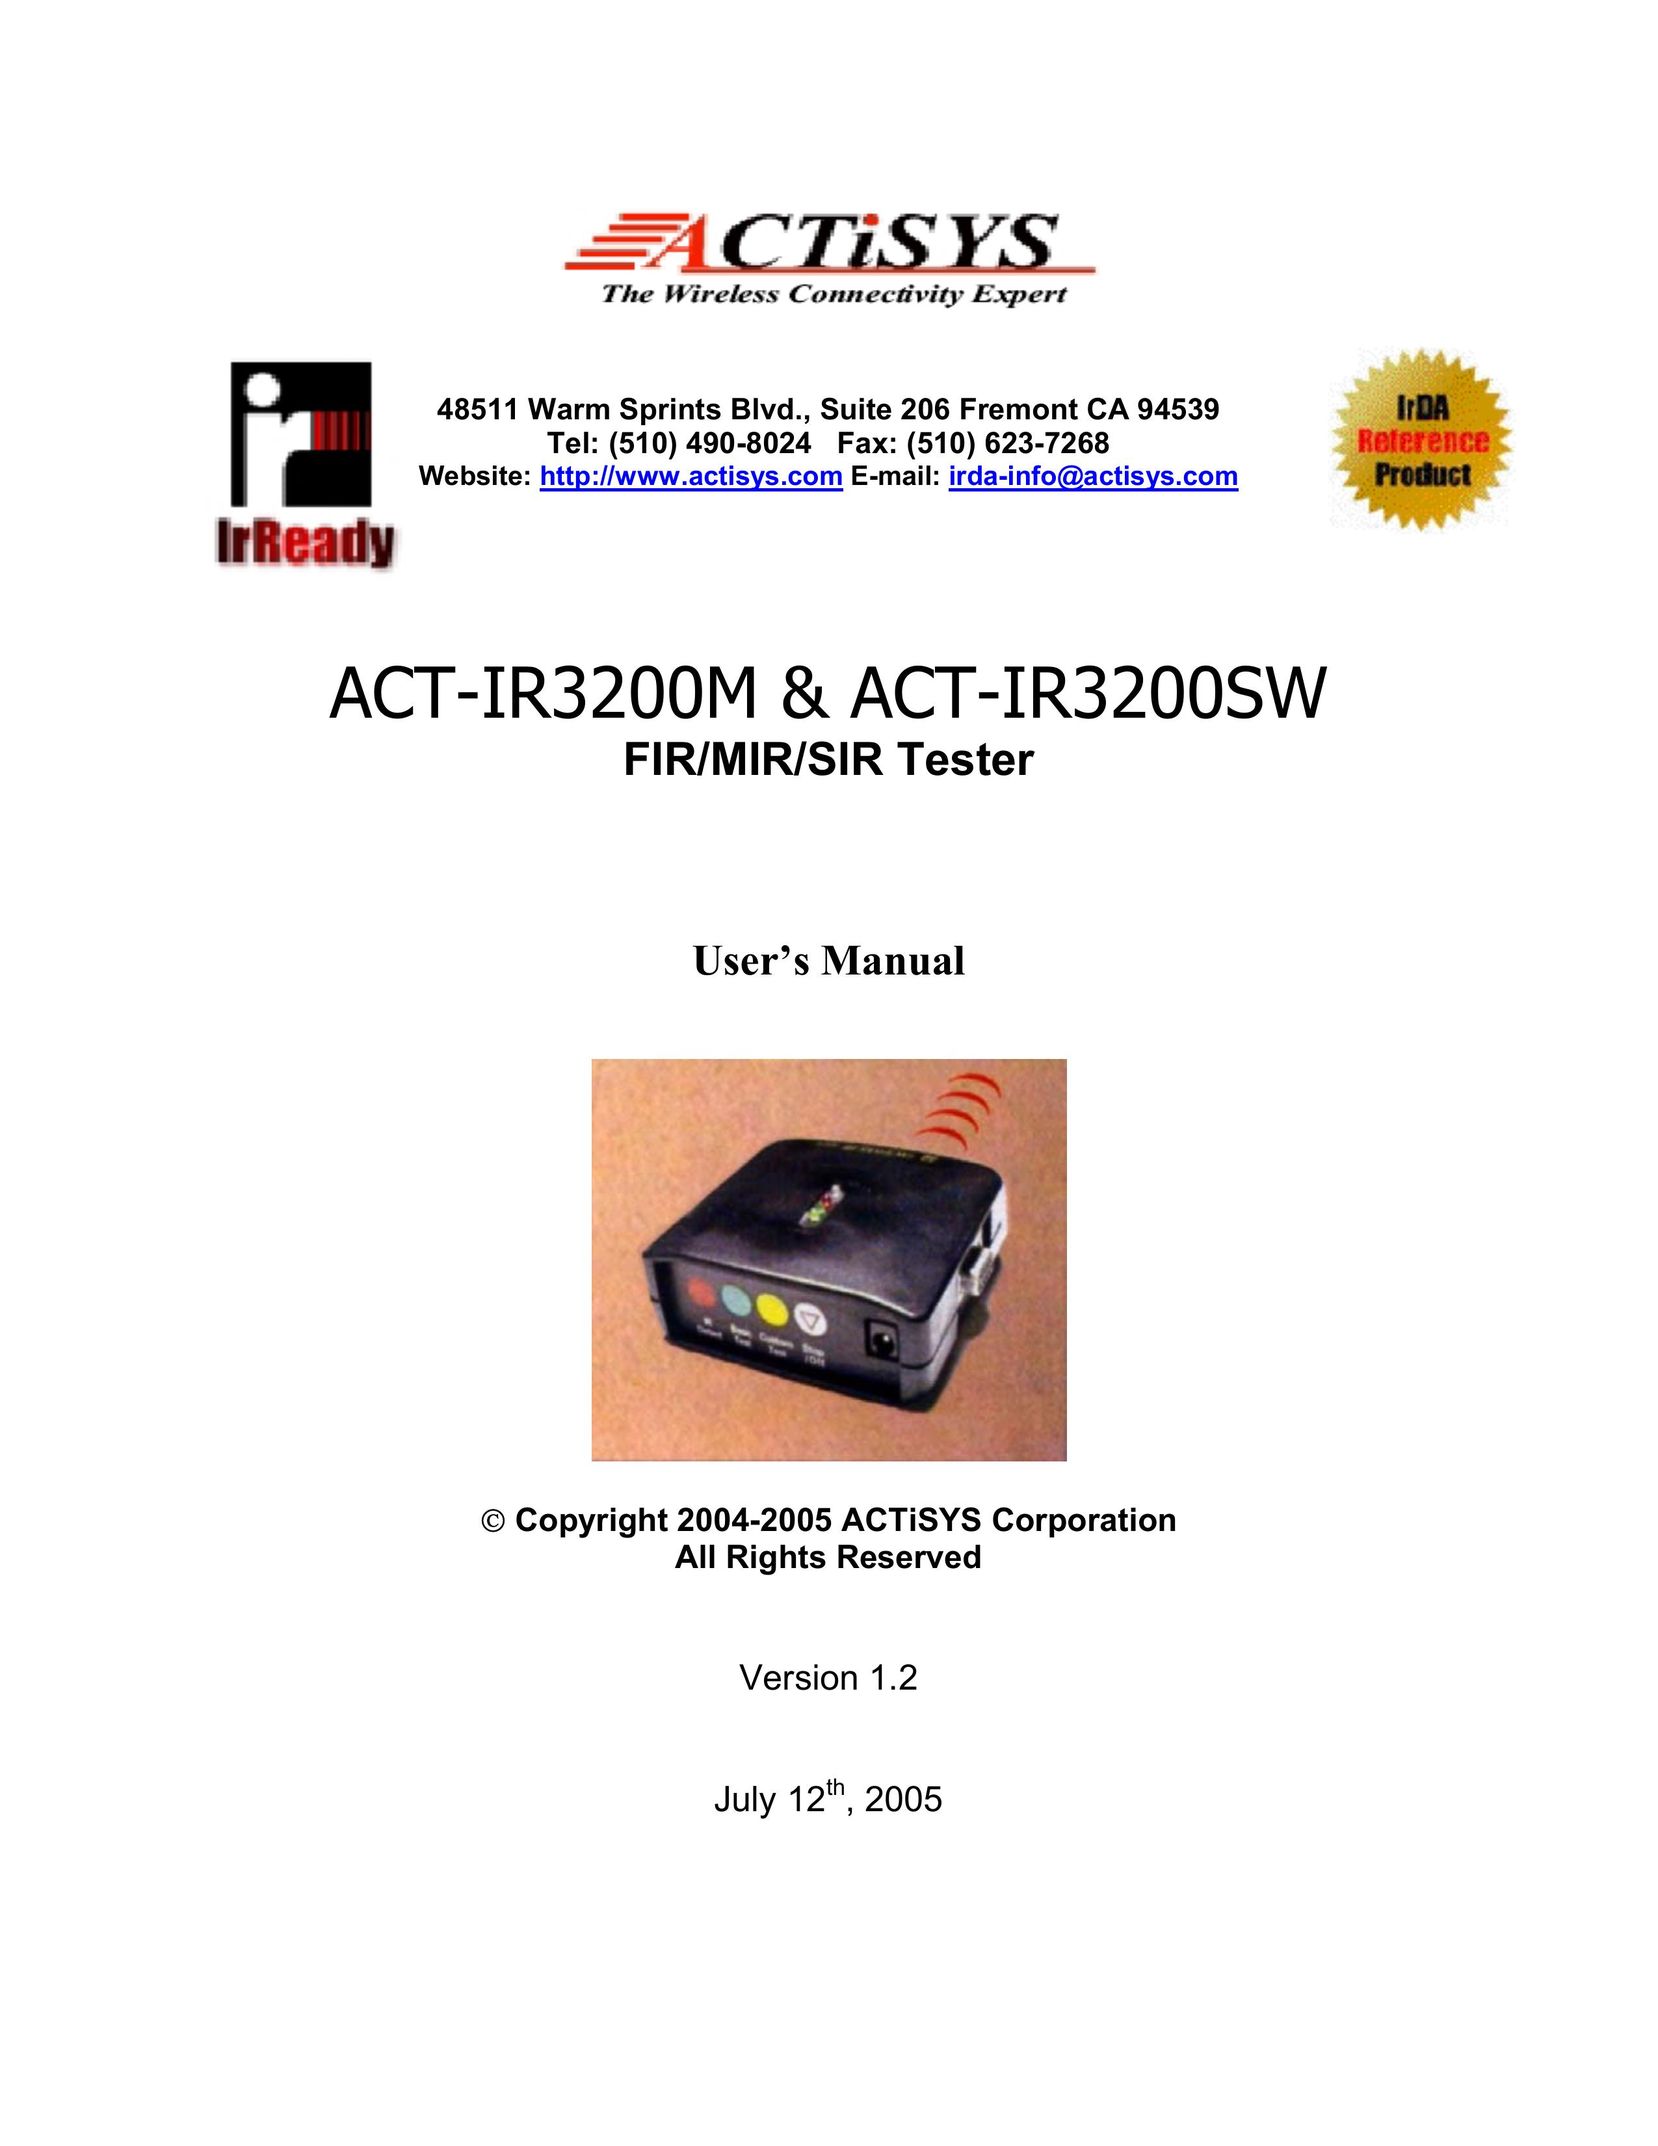 ACTiSYS ACT-IR3200M Computer Accessories User Manual (Page 1)